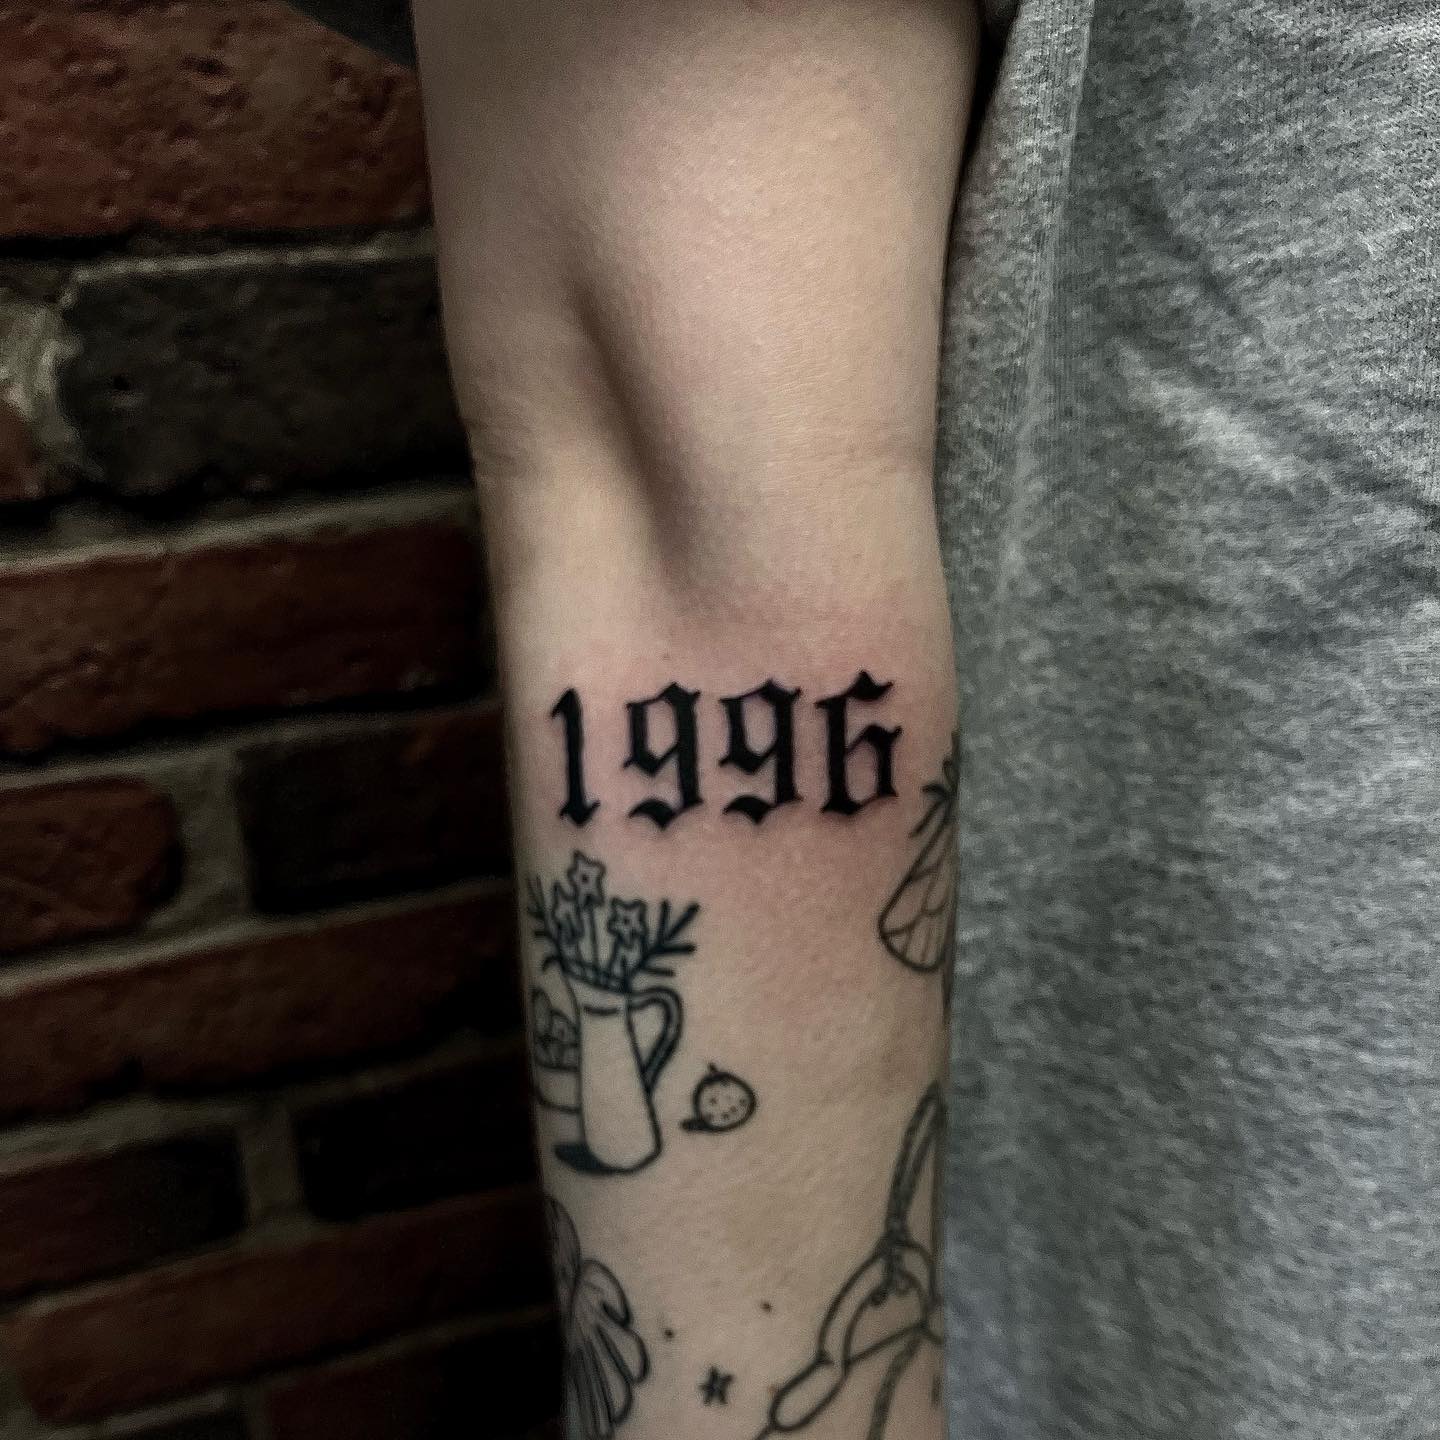 Place the date and time of your birth on your elbow if you wish that everyone knows it. You can also go for a tattoo of someone important in your life and someone who means a lot to you. Black giant ink such as this one is great for people who like bigger and flashier ideas.